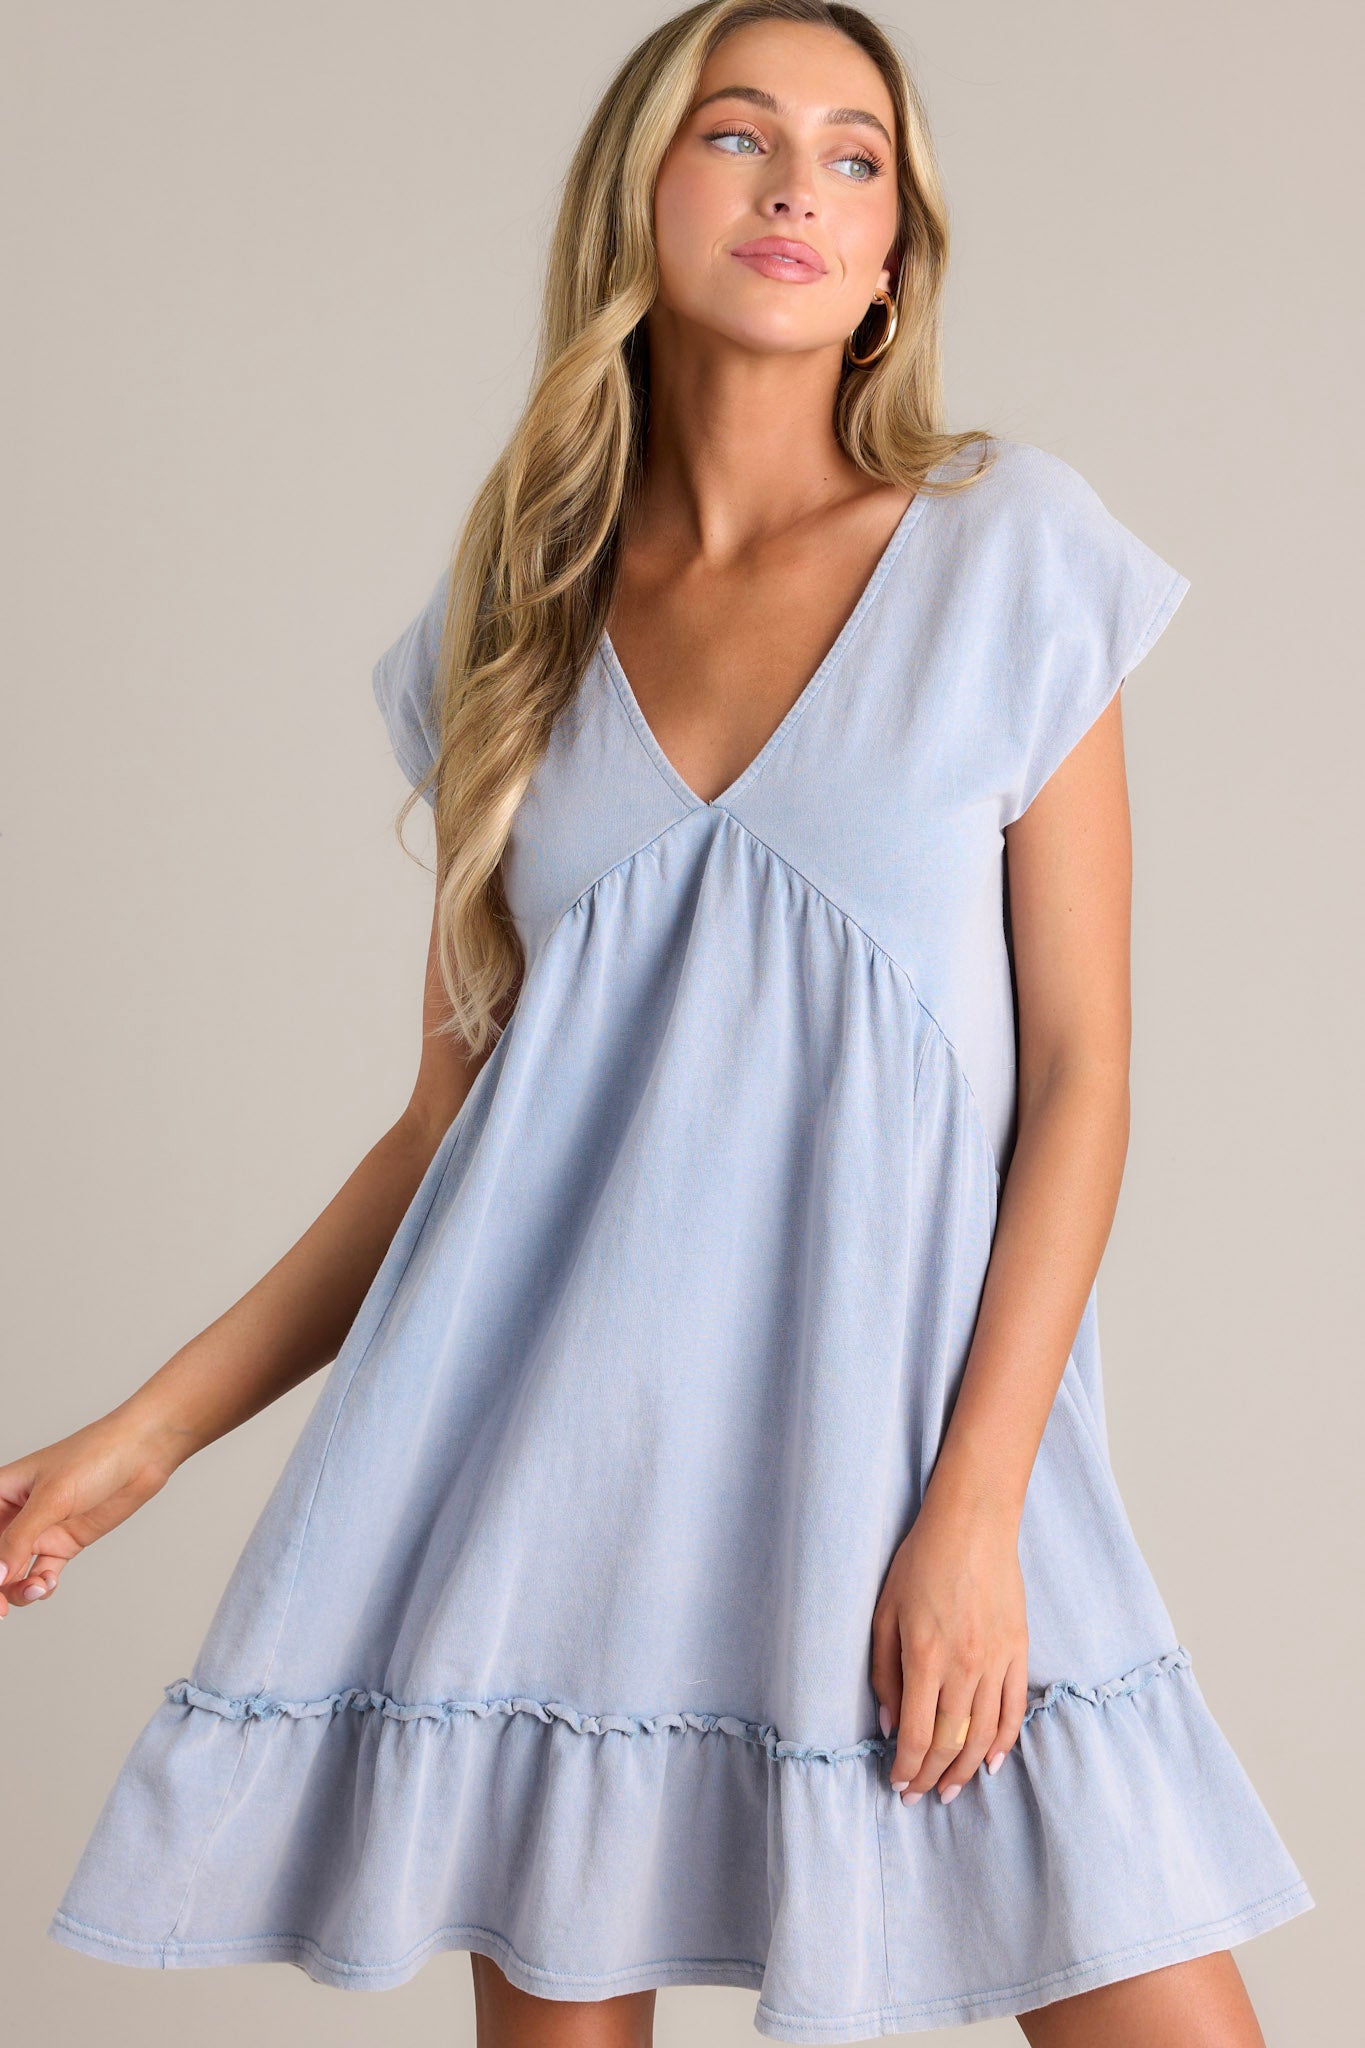 Action shot of a blue mini dress displaying the flow and movement of the fabric, highlighting the v-neckline, ruching below the bust line, and short cap sleeves.